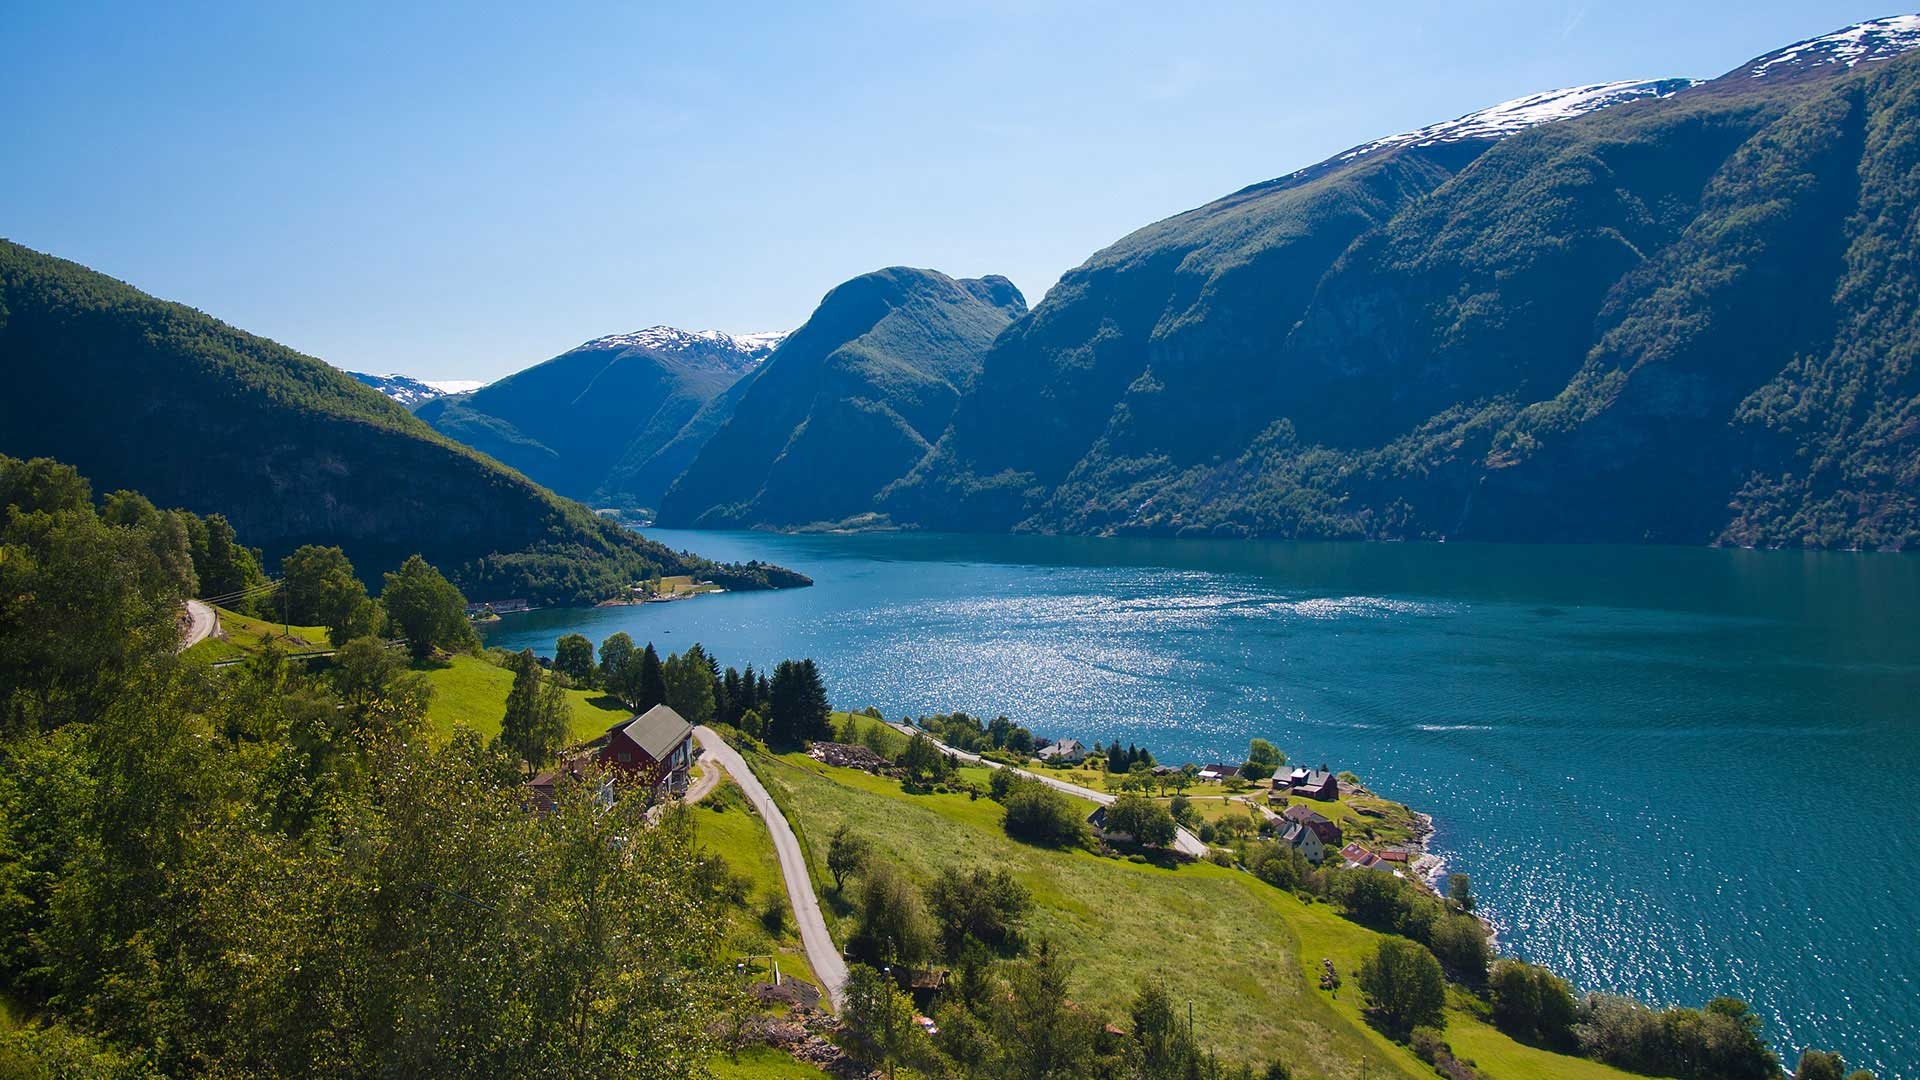 Wonders of Norwegian fjords, Guided group tours, Nordic visitor experience, 7 days adventure, 1920x1080 Full HD Desktop